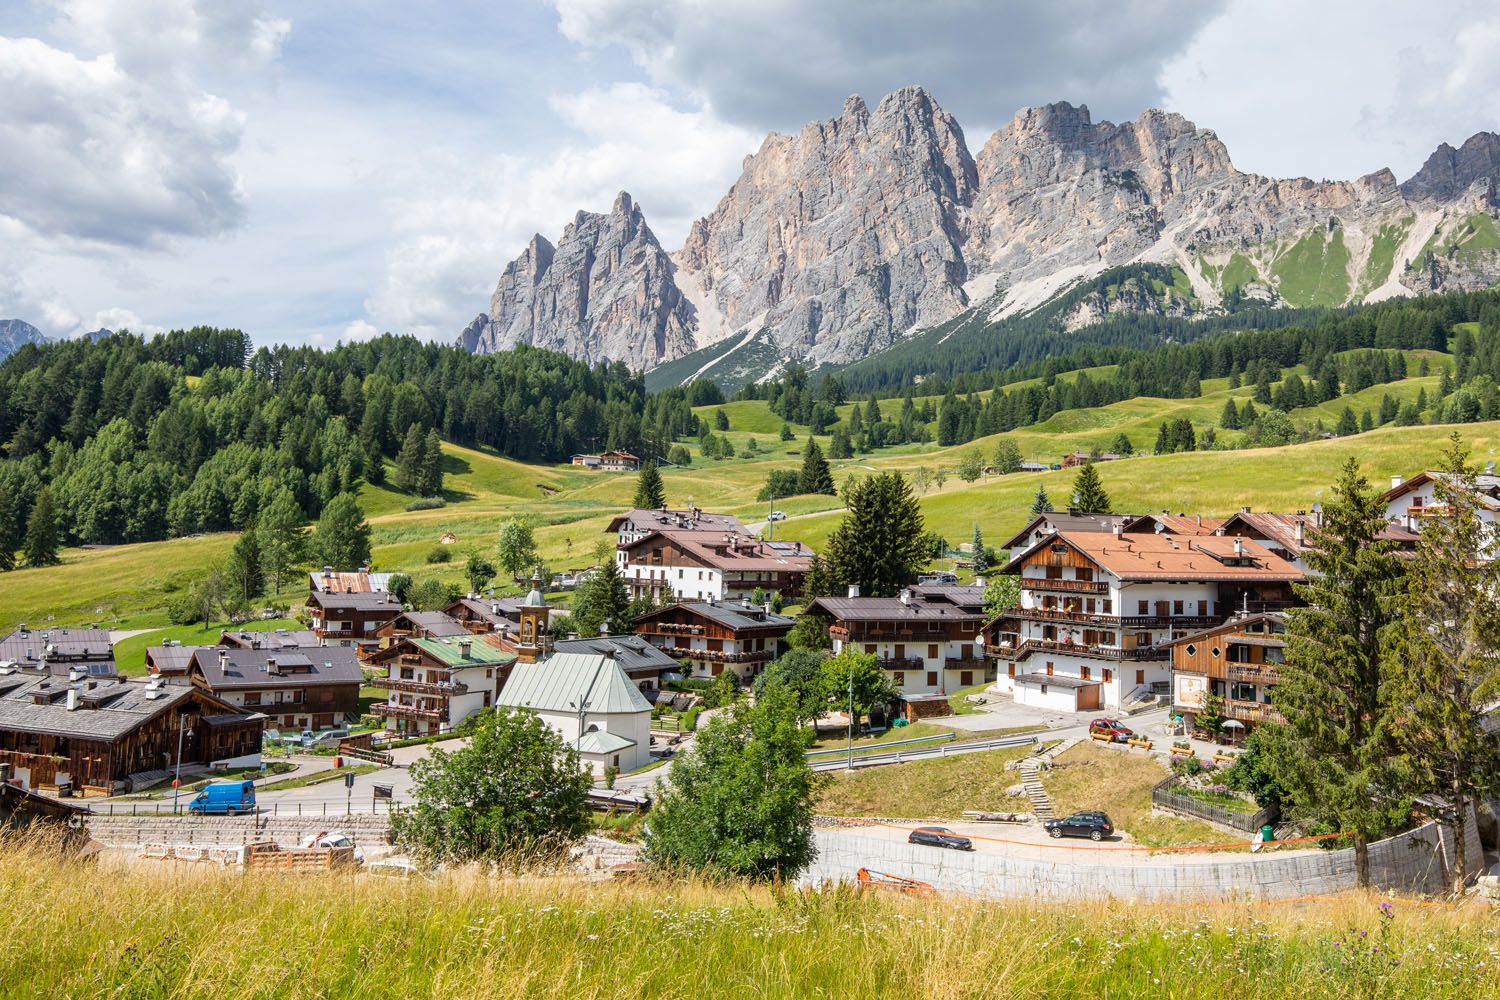 Near Cortina d'Ampezzo | How to plan a trip to the Dolomites